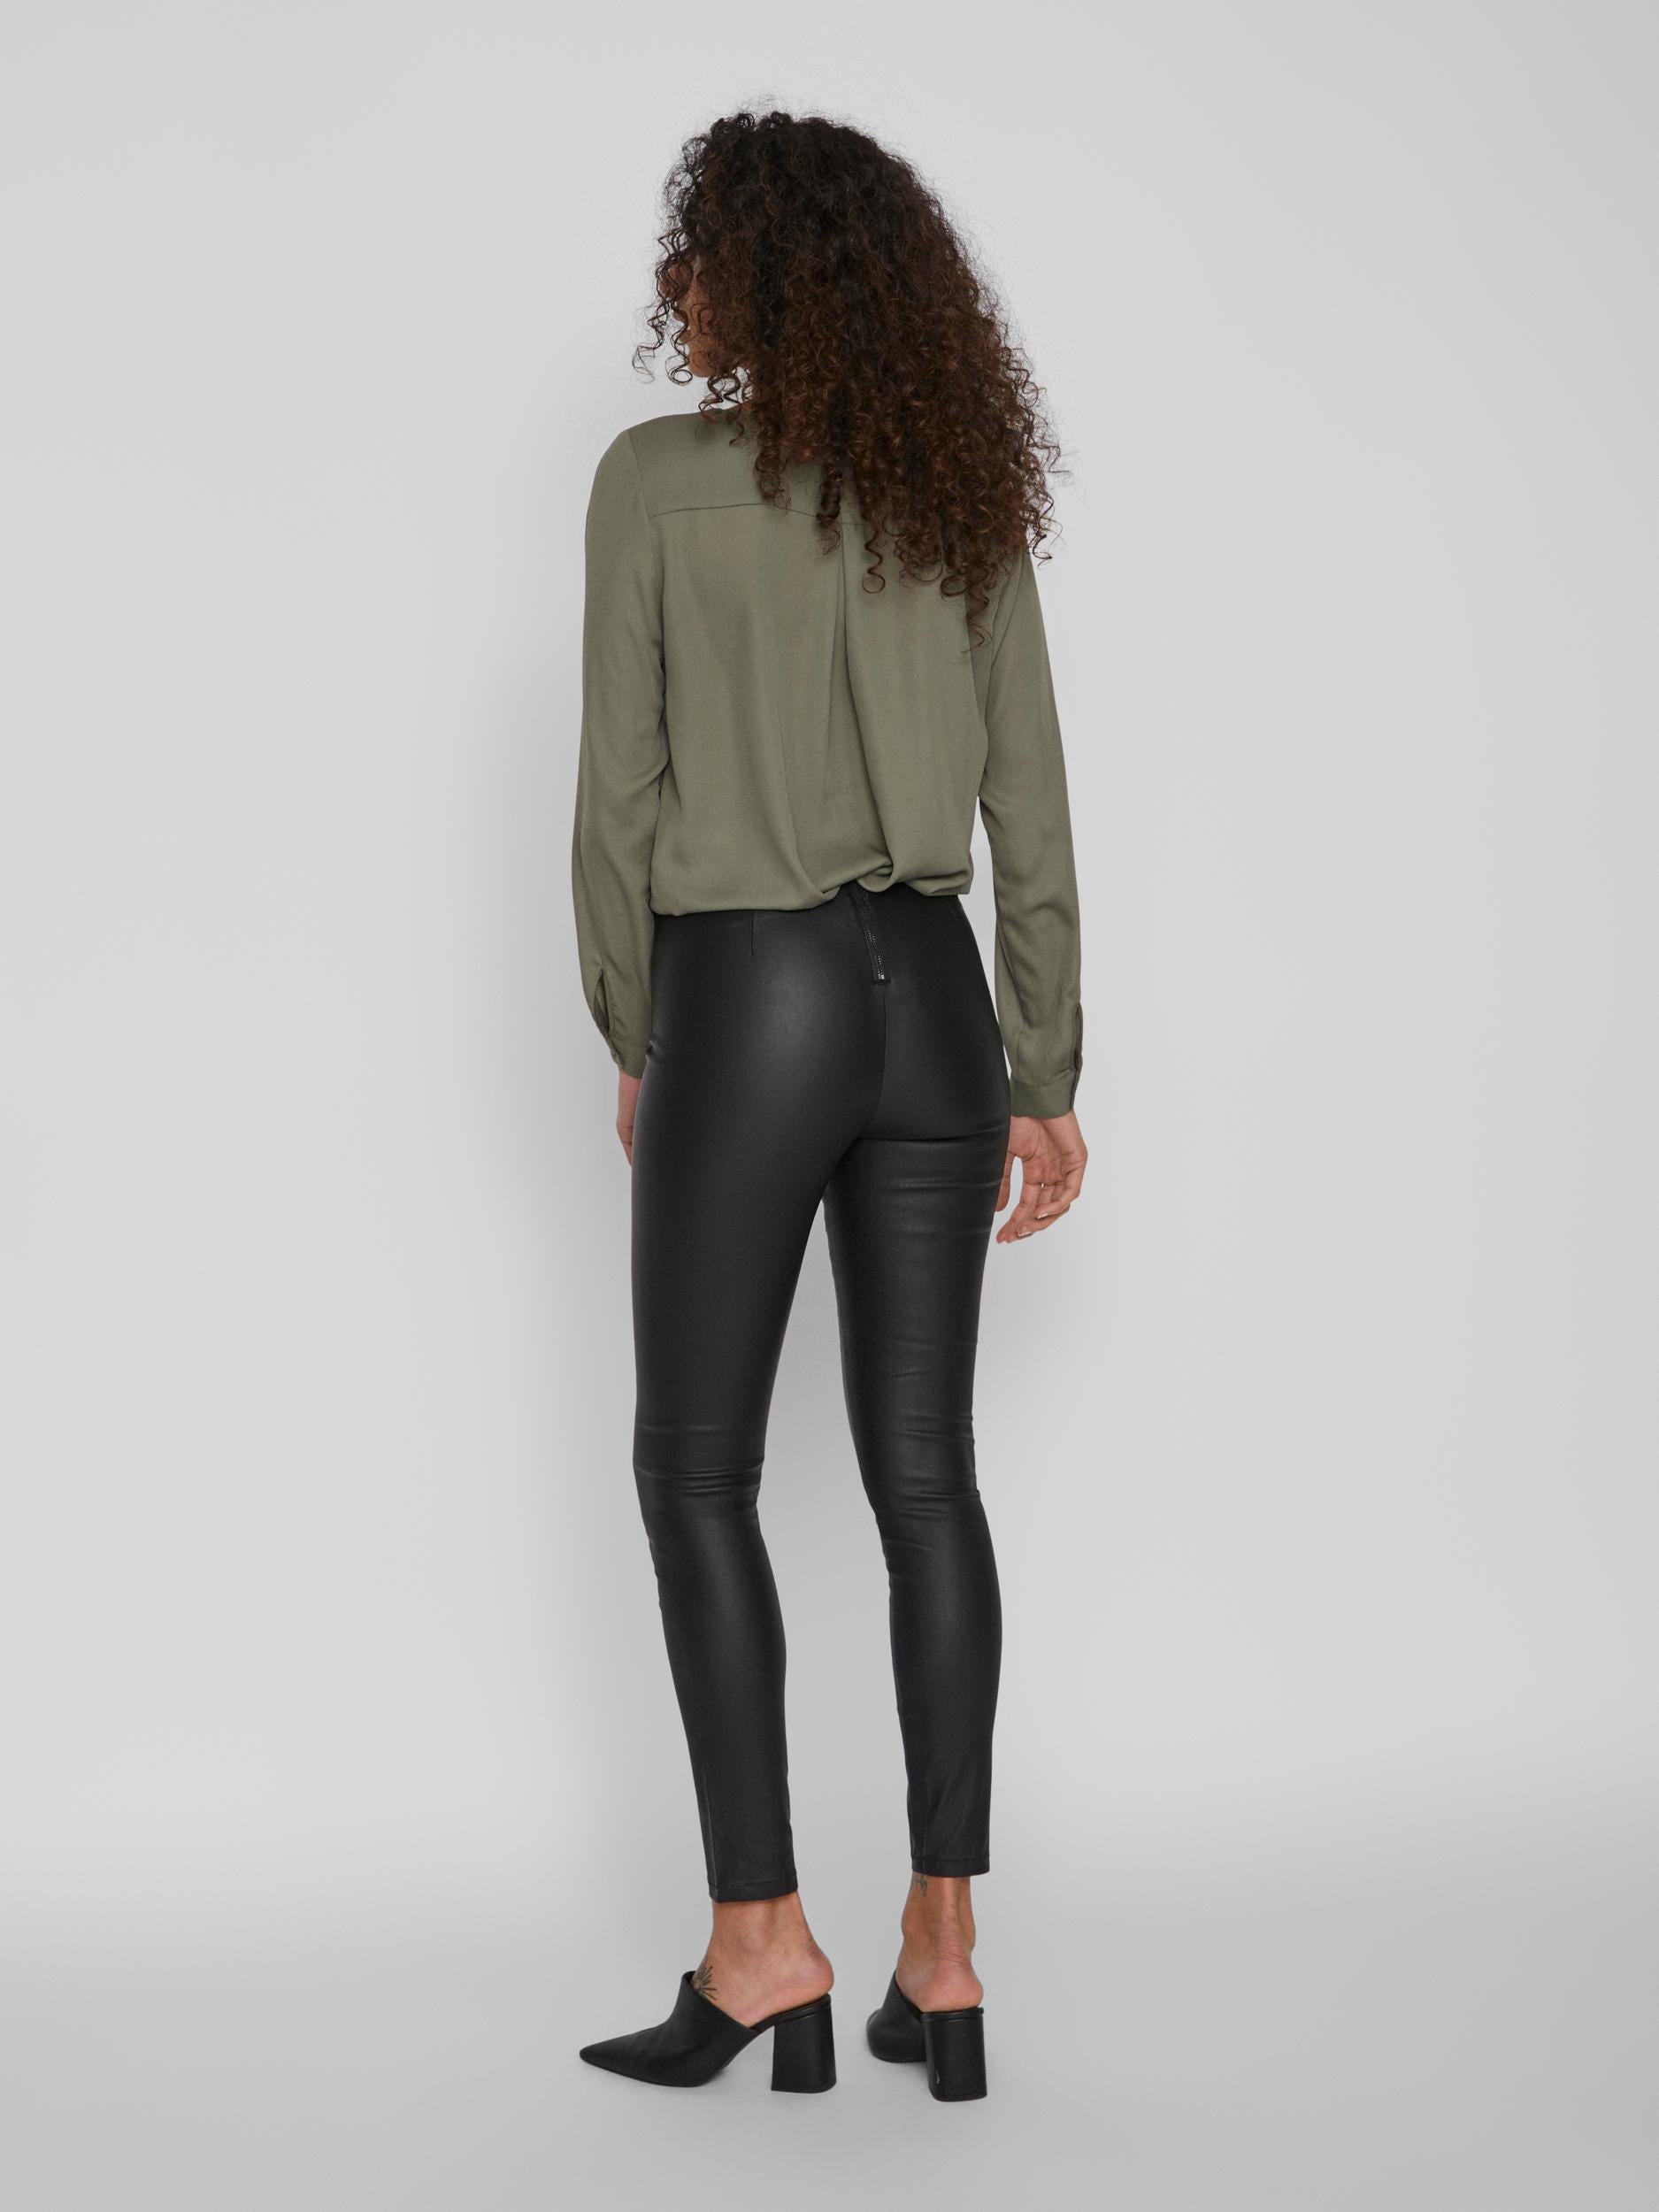 Coated Leggings, Shop The Largest Collection